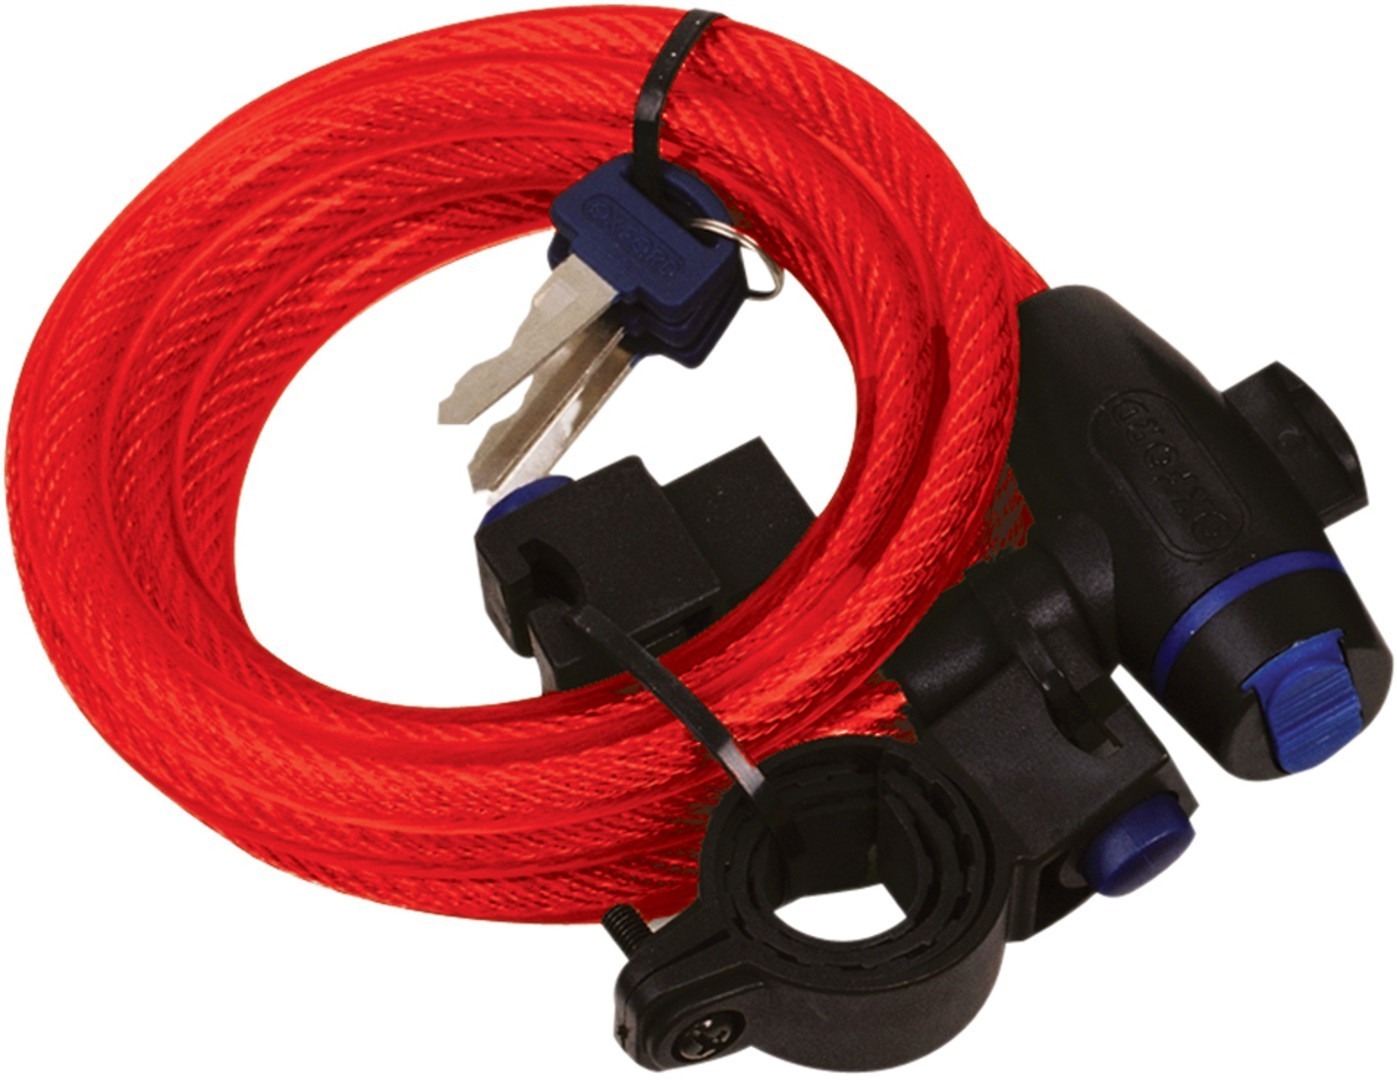 Oxford Cable Lock, red, red, Size One Size